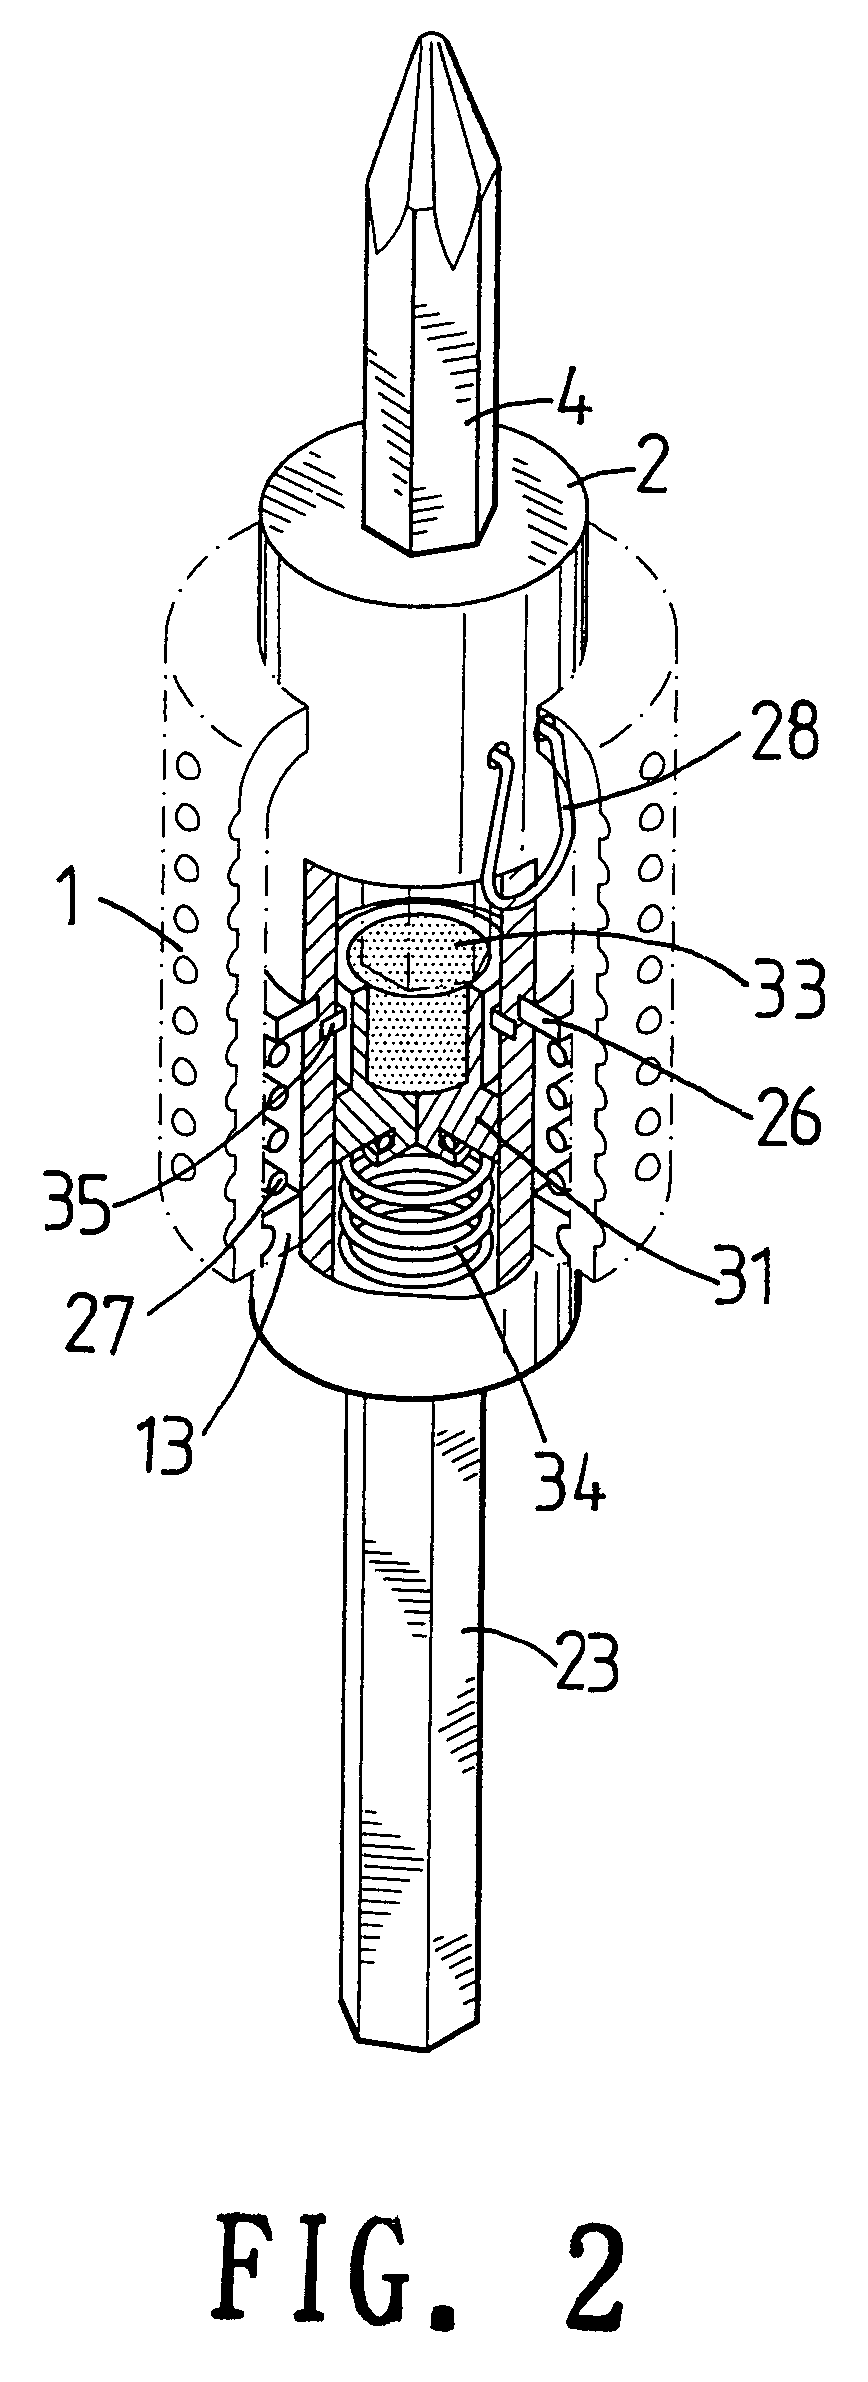 Socket assembly that can be mounted and detached quickly